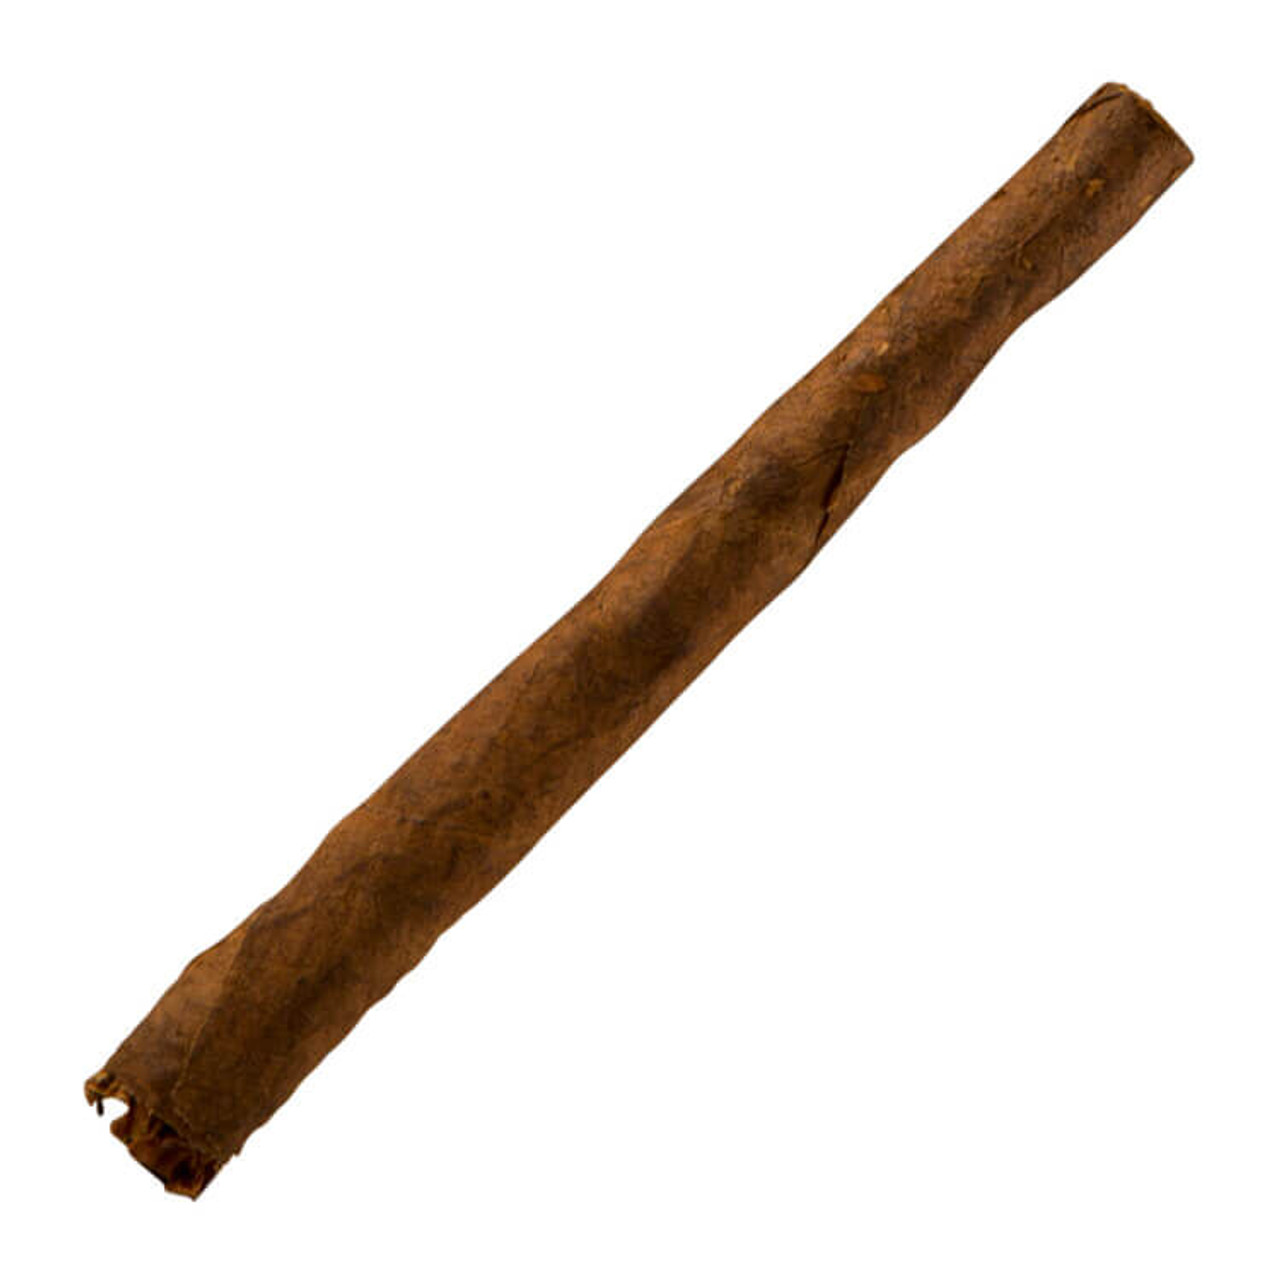 Swisher Leaf Aromatic Cigars - (30 Packs of 2 (60 total))